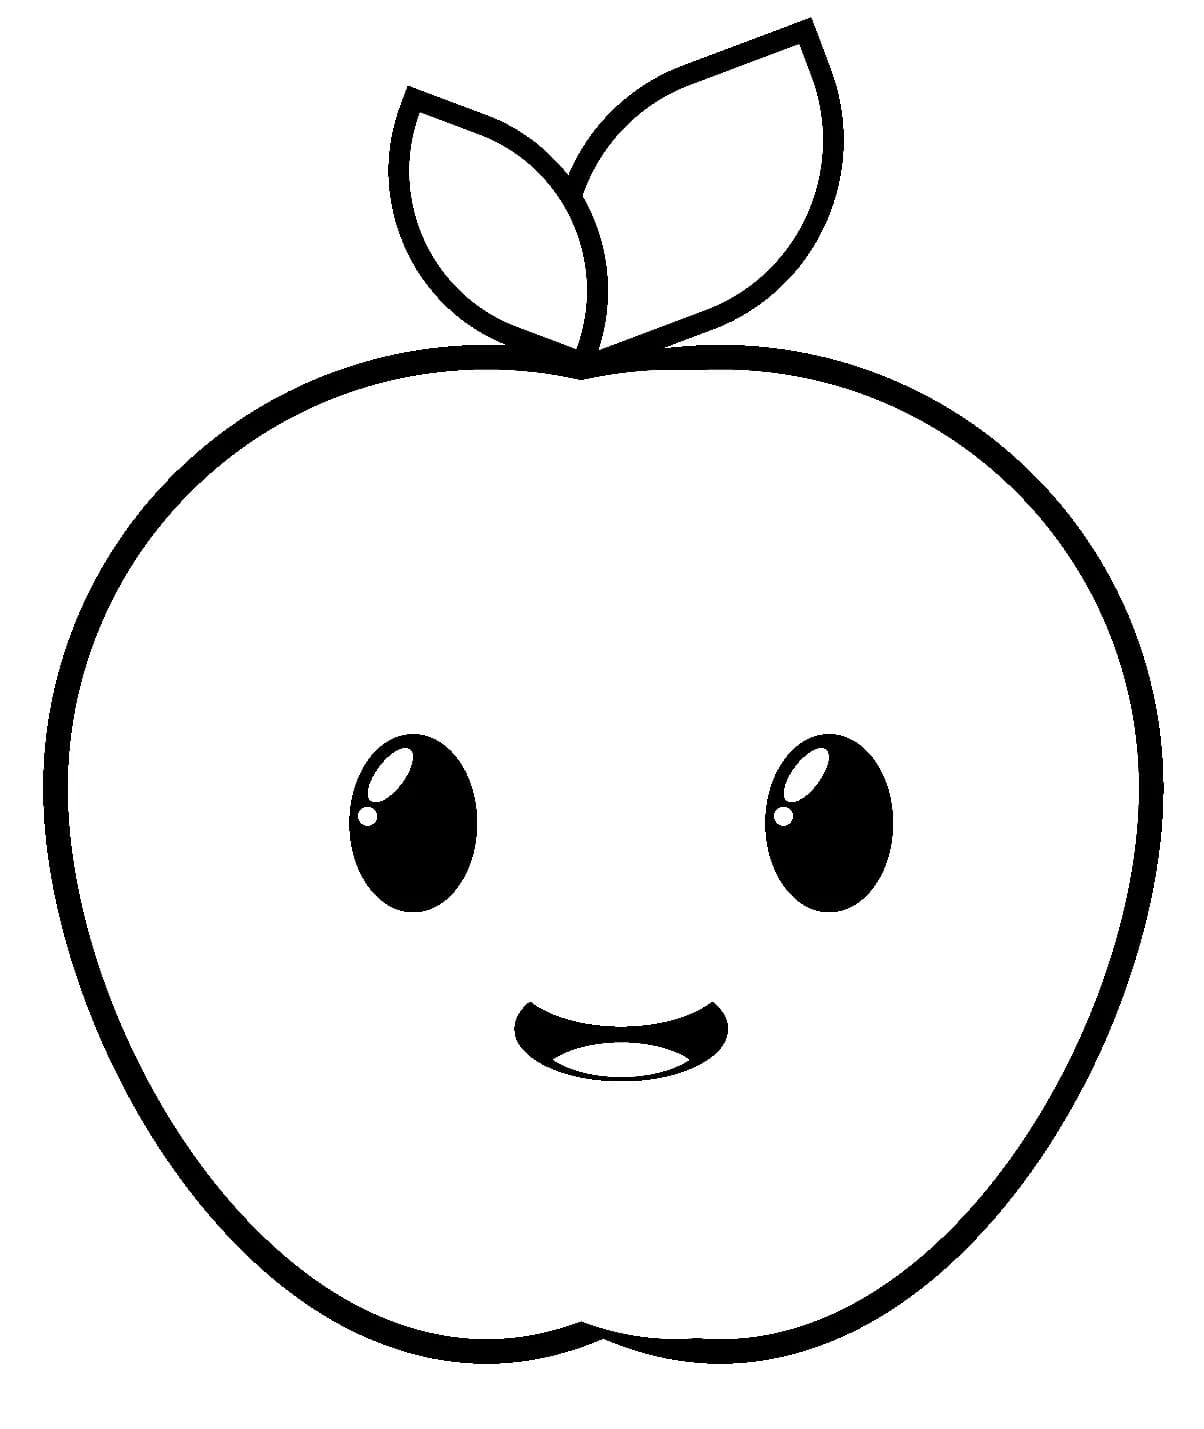 Cute Apple Coloring Page Outline Sketch Drawing Vector Easy Apple ...